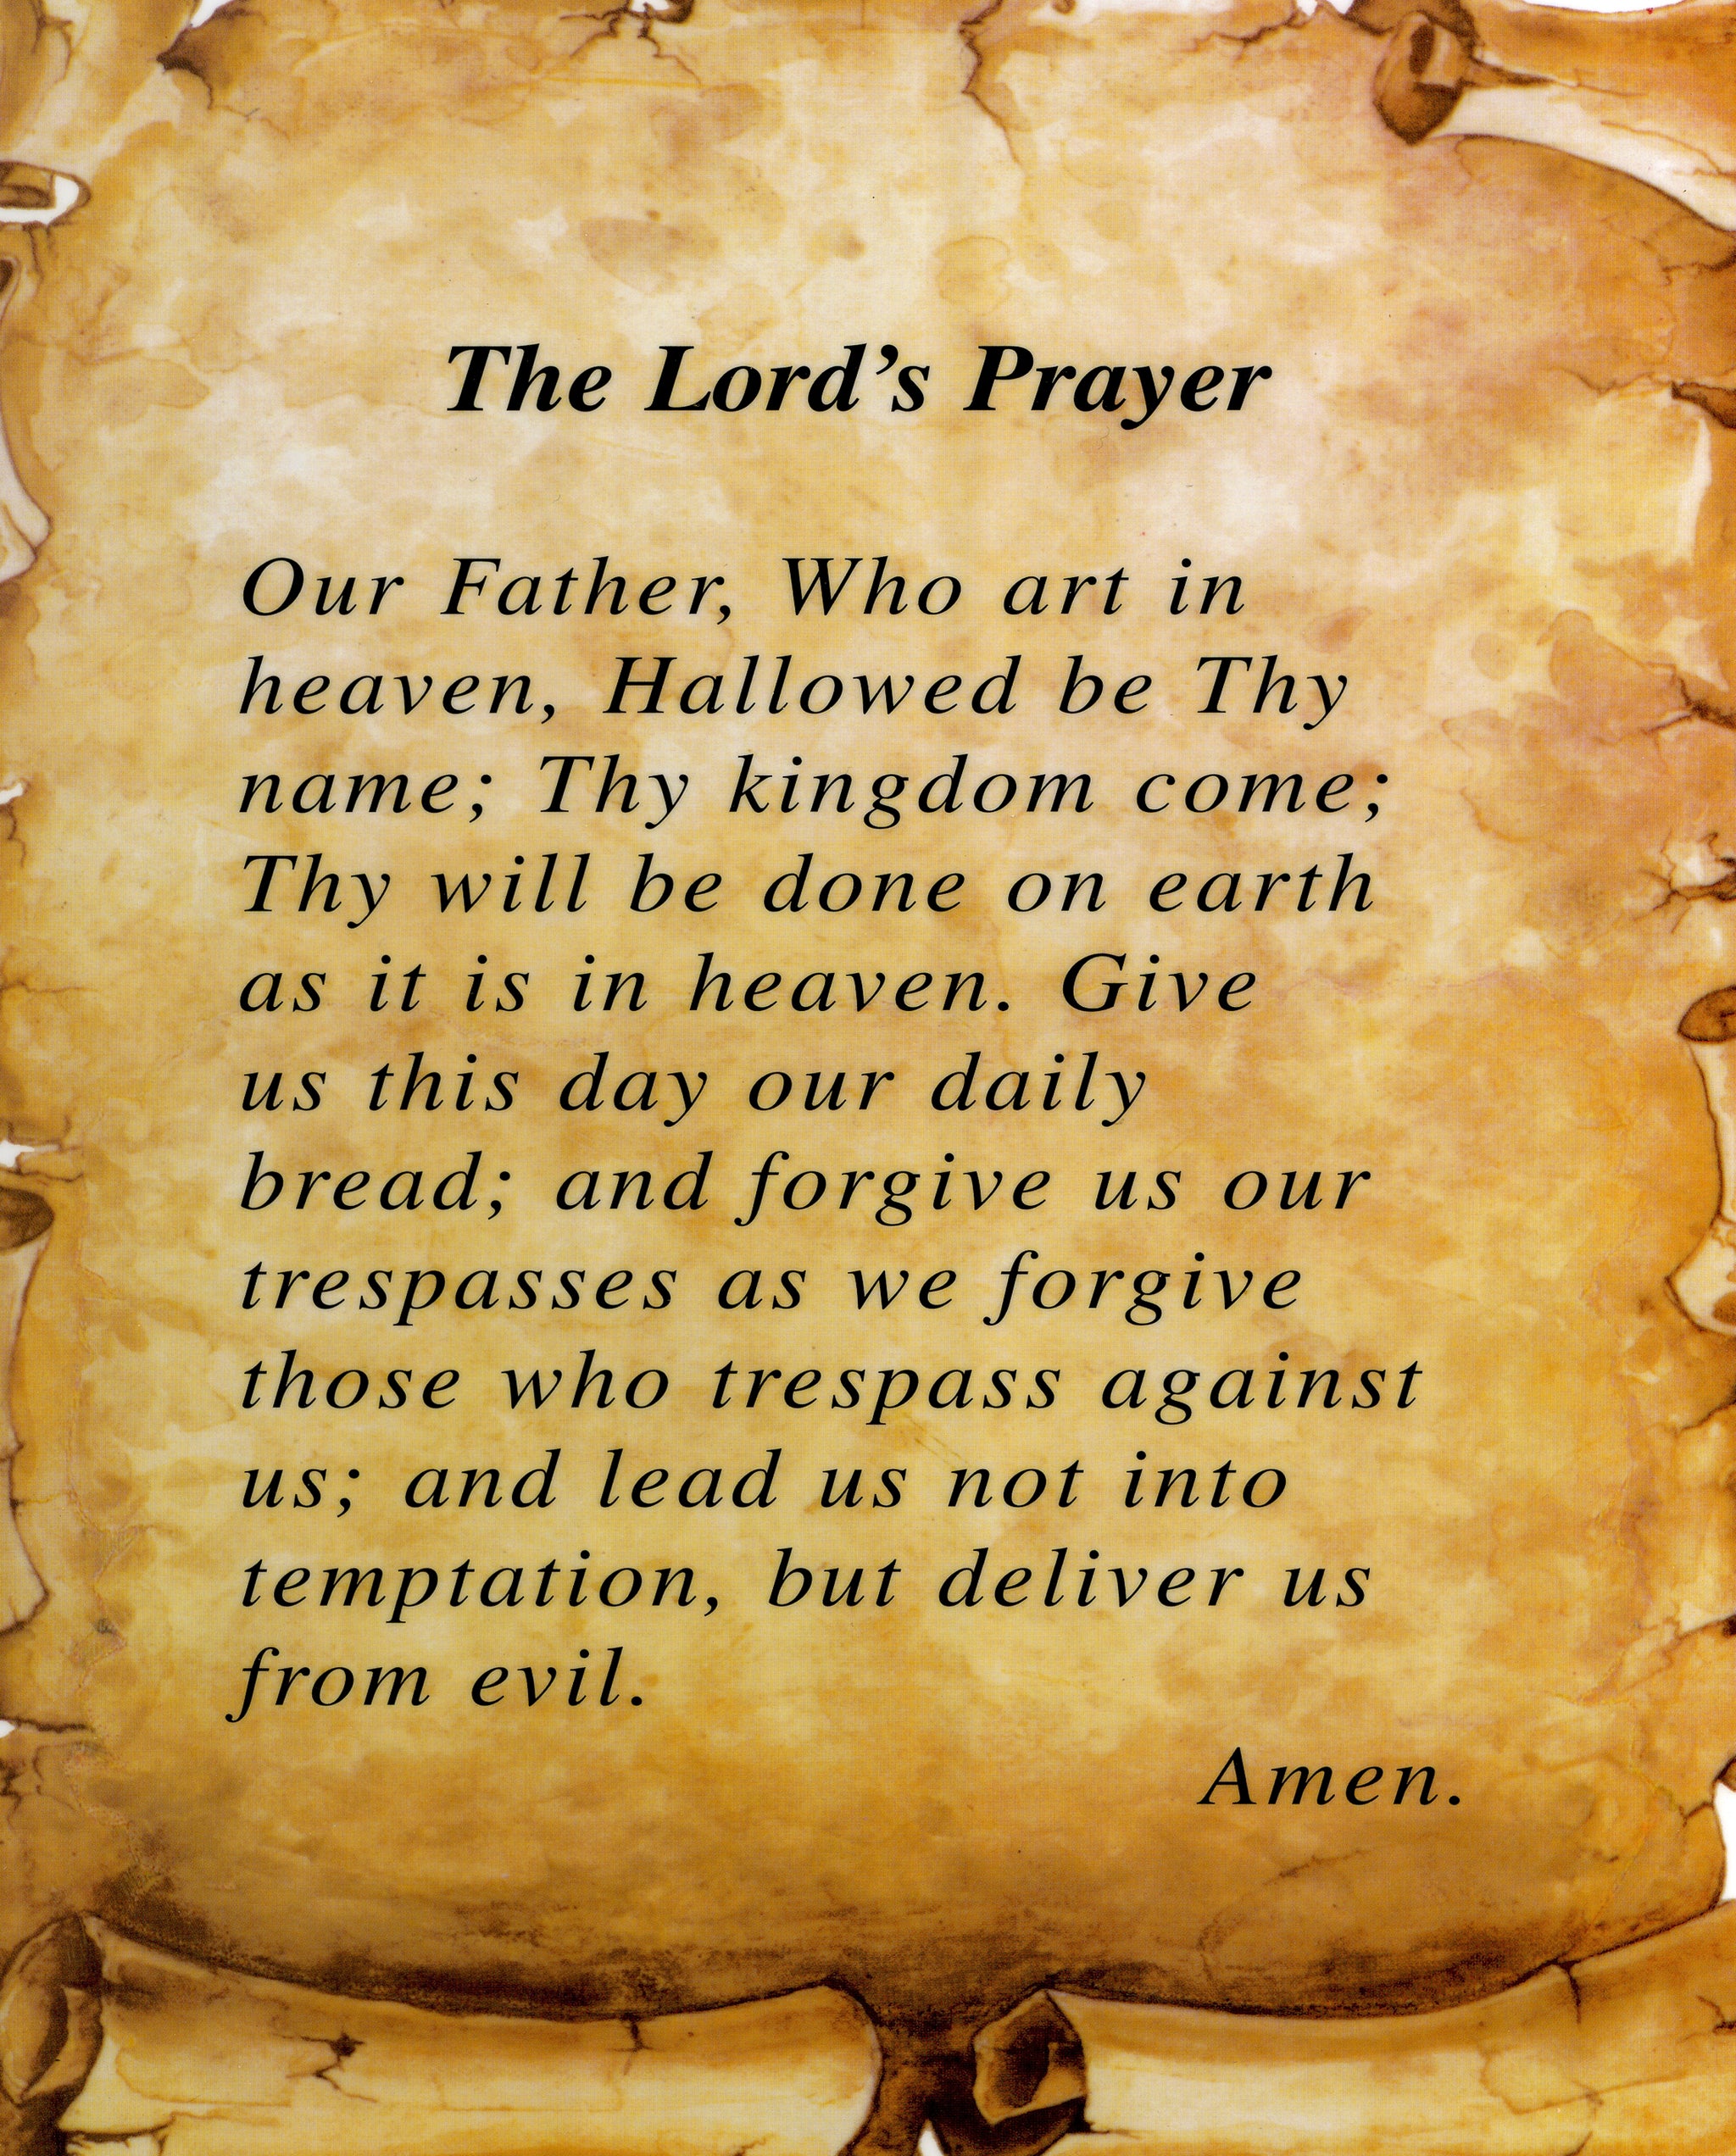 Why is the Catholic Lord's prayer different?